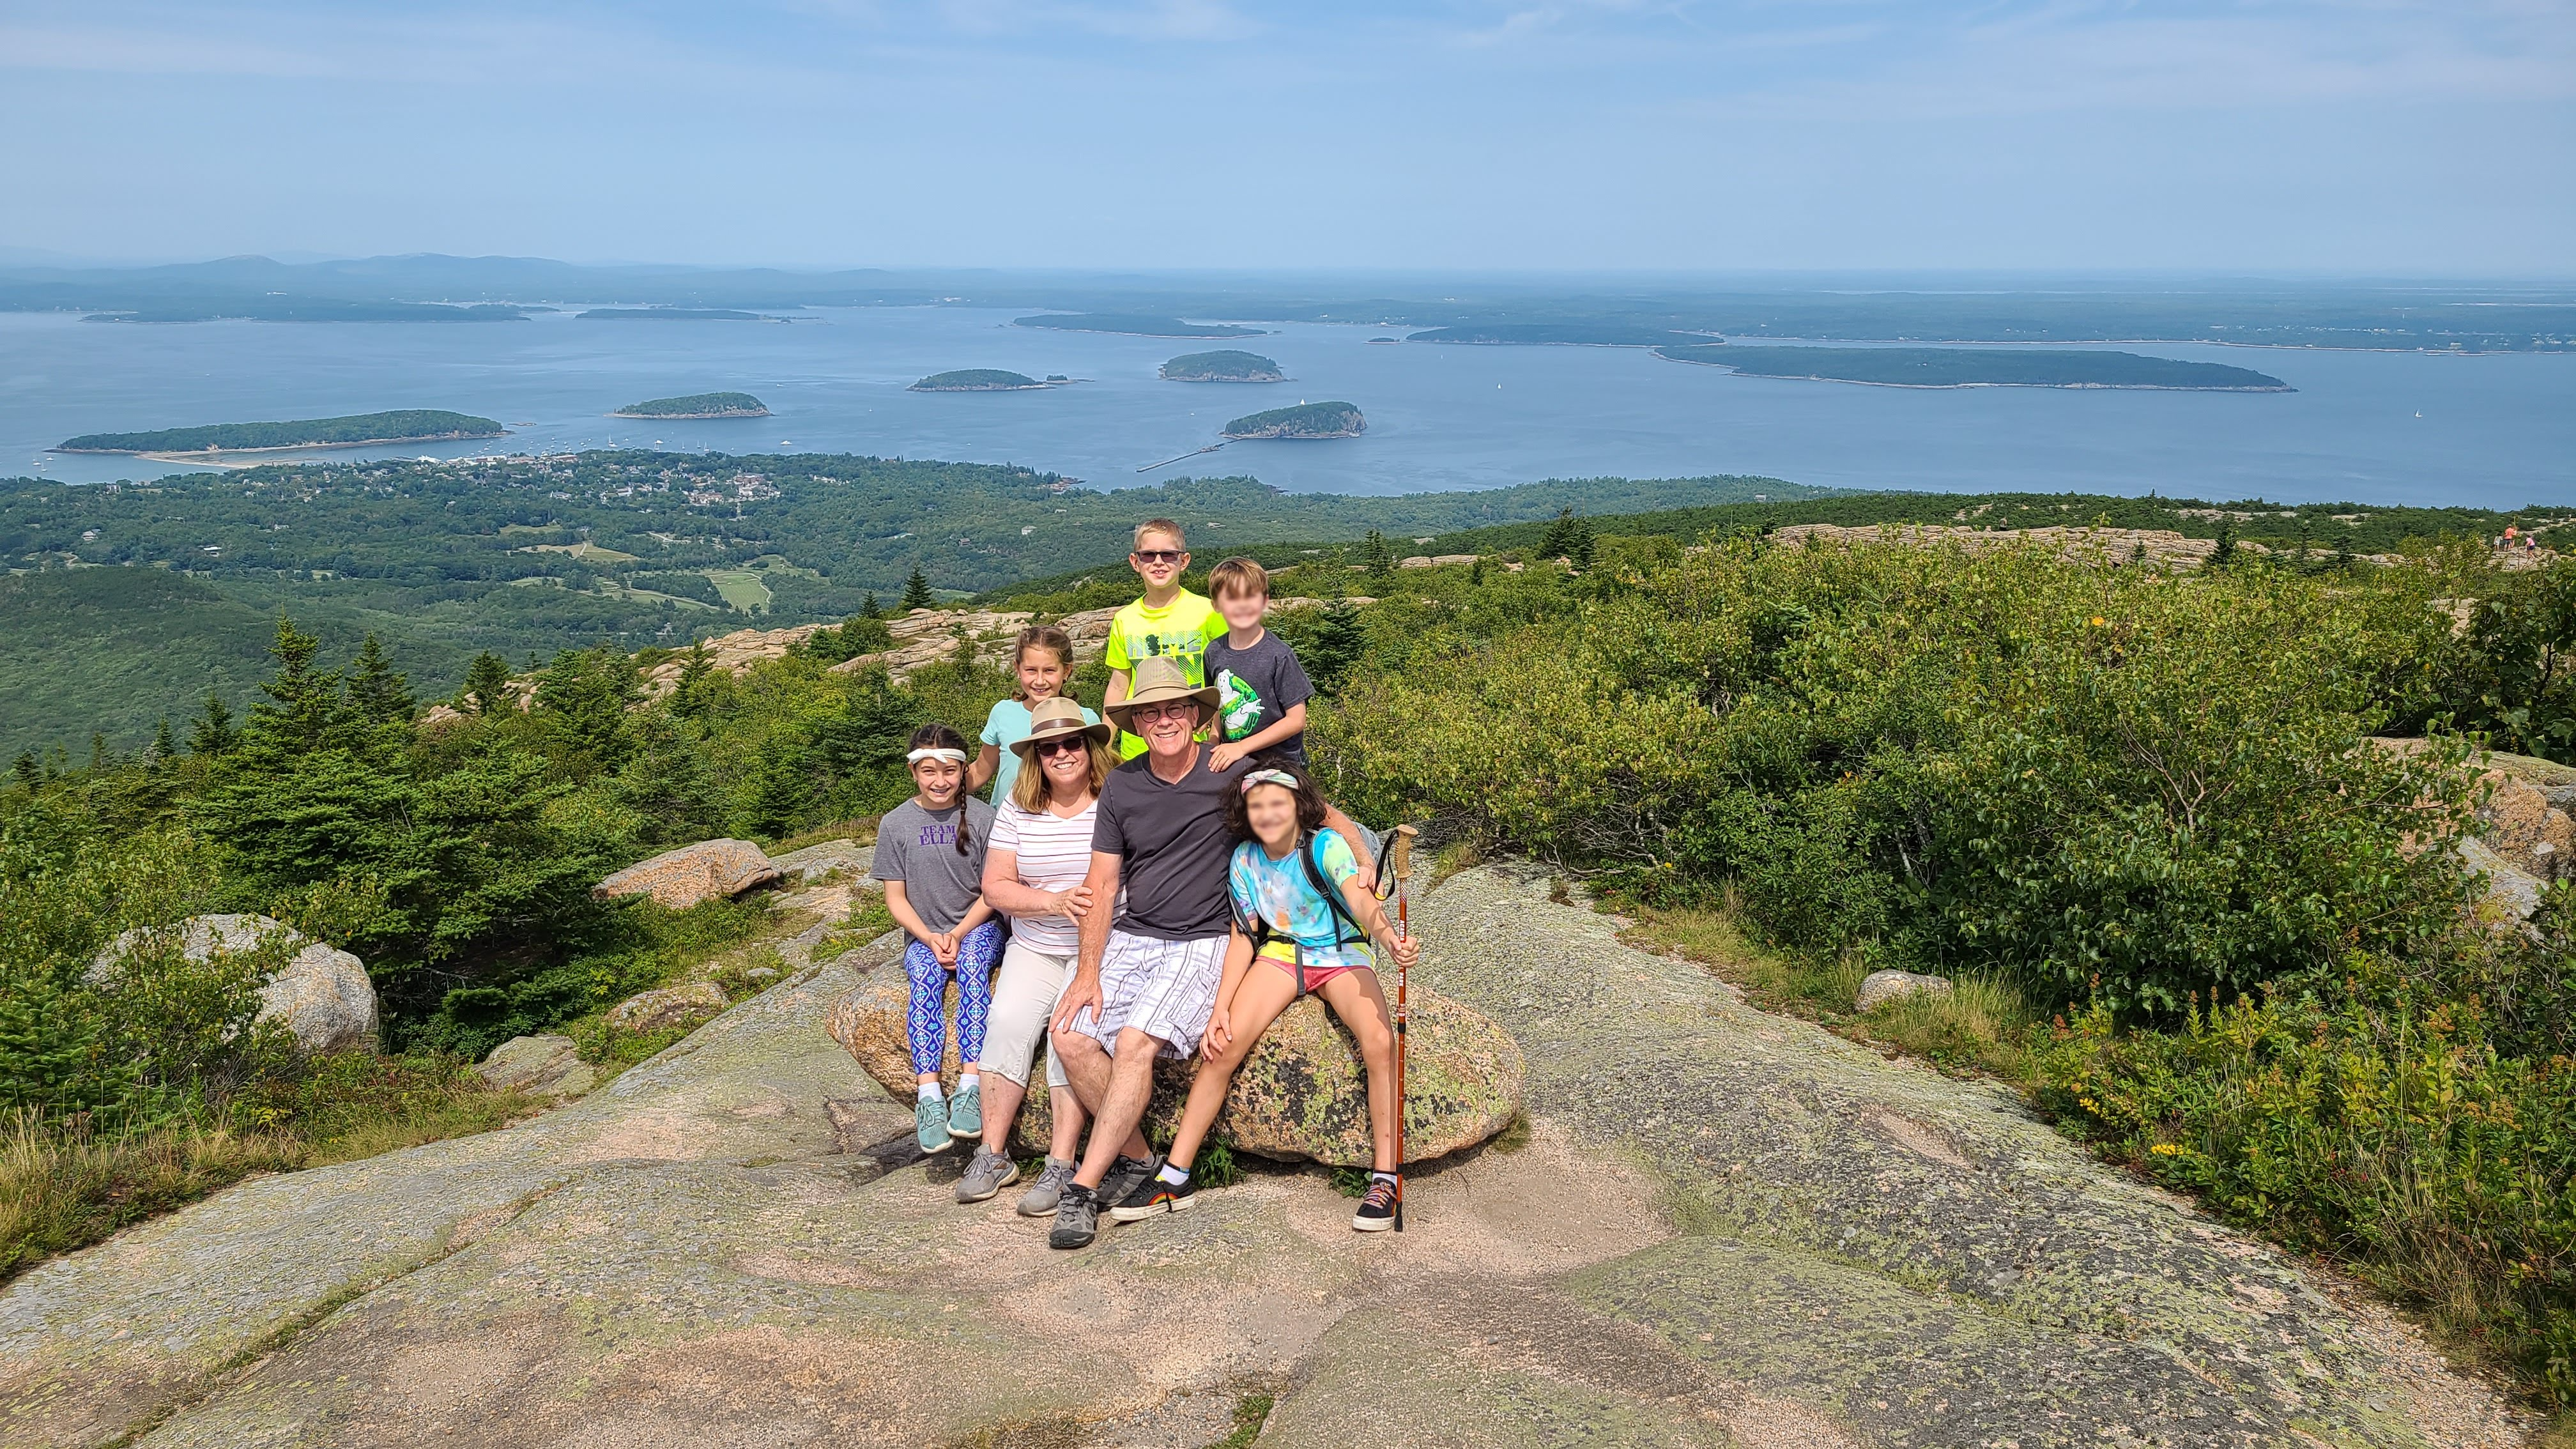 Family of 7 posing on top of large stone at top of a mountain